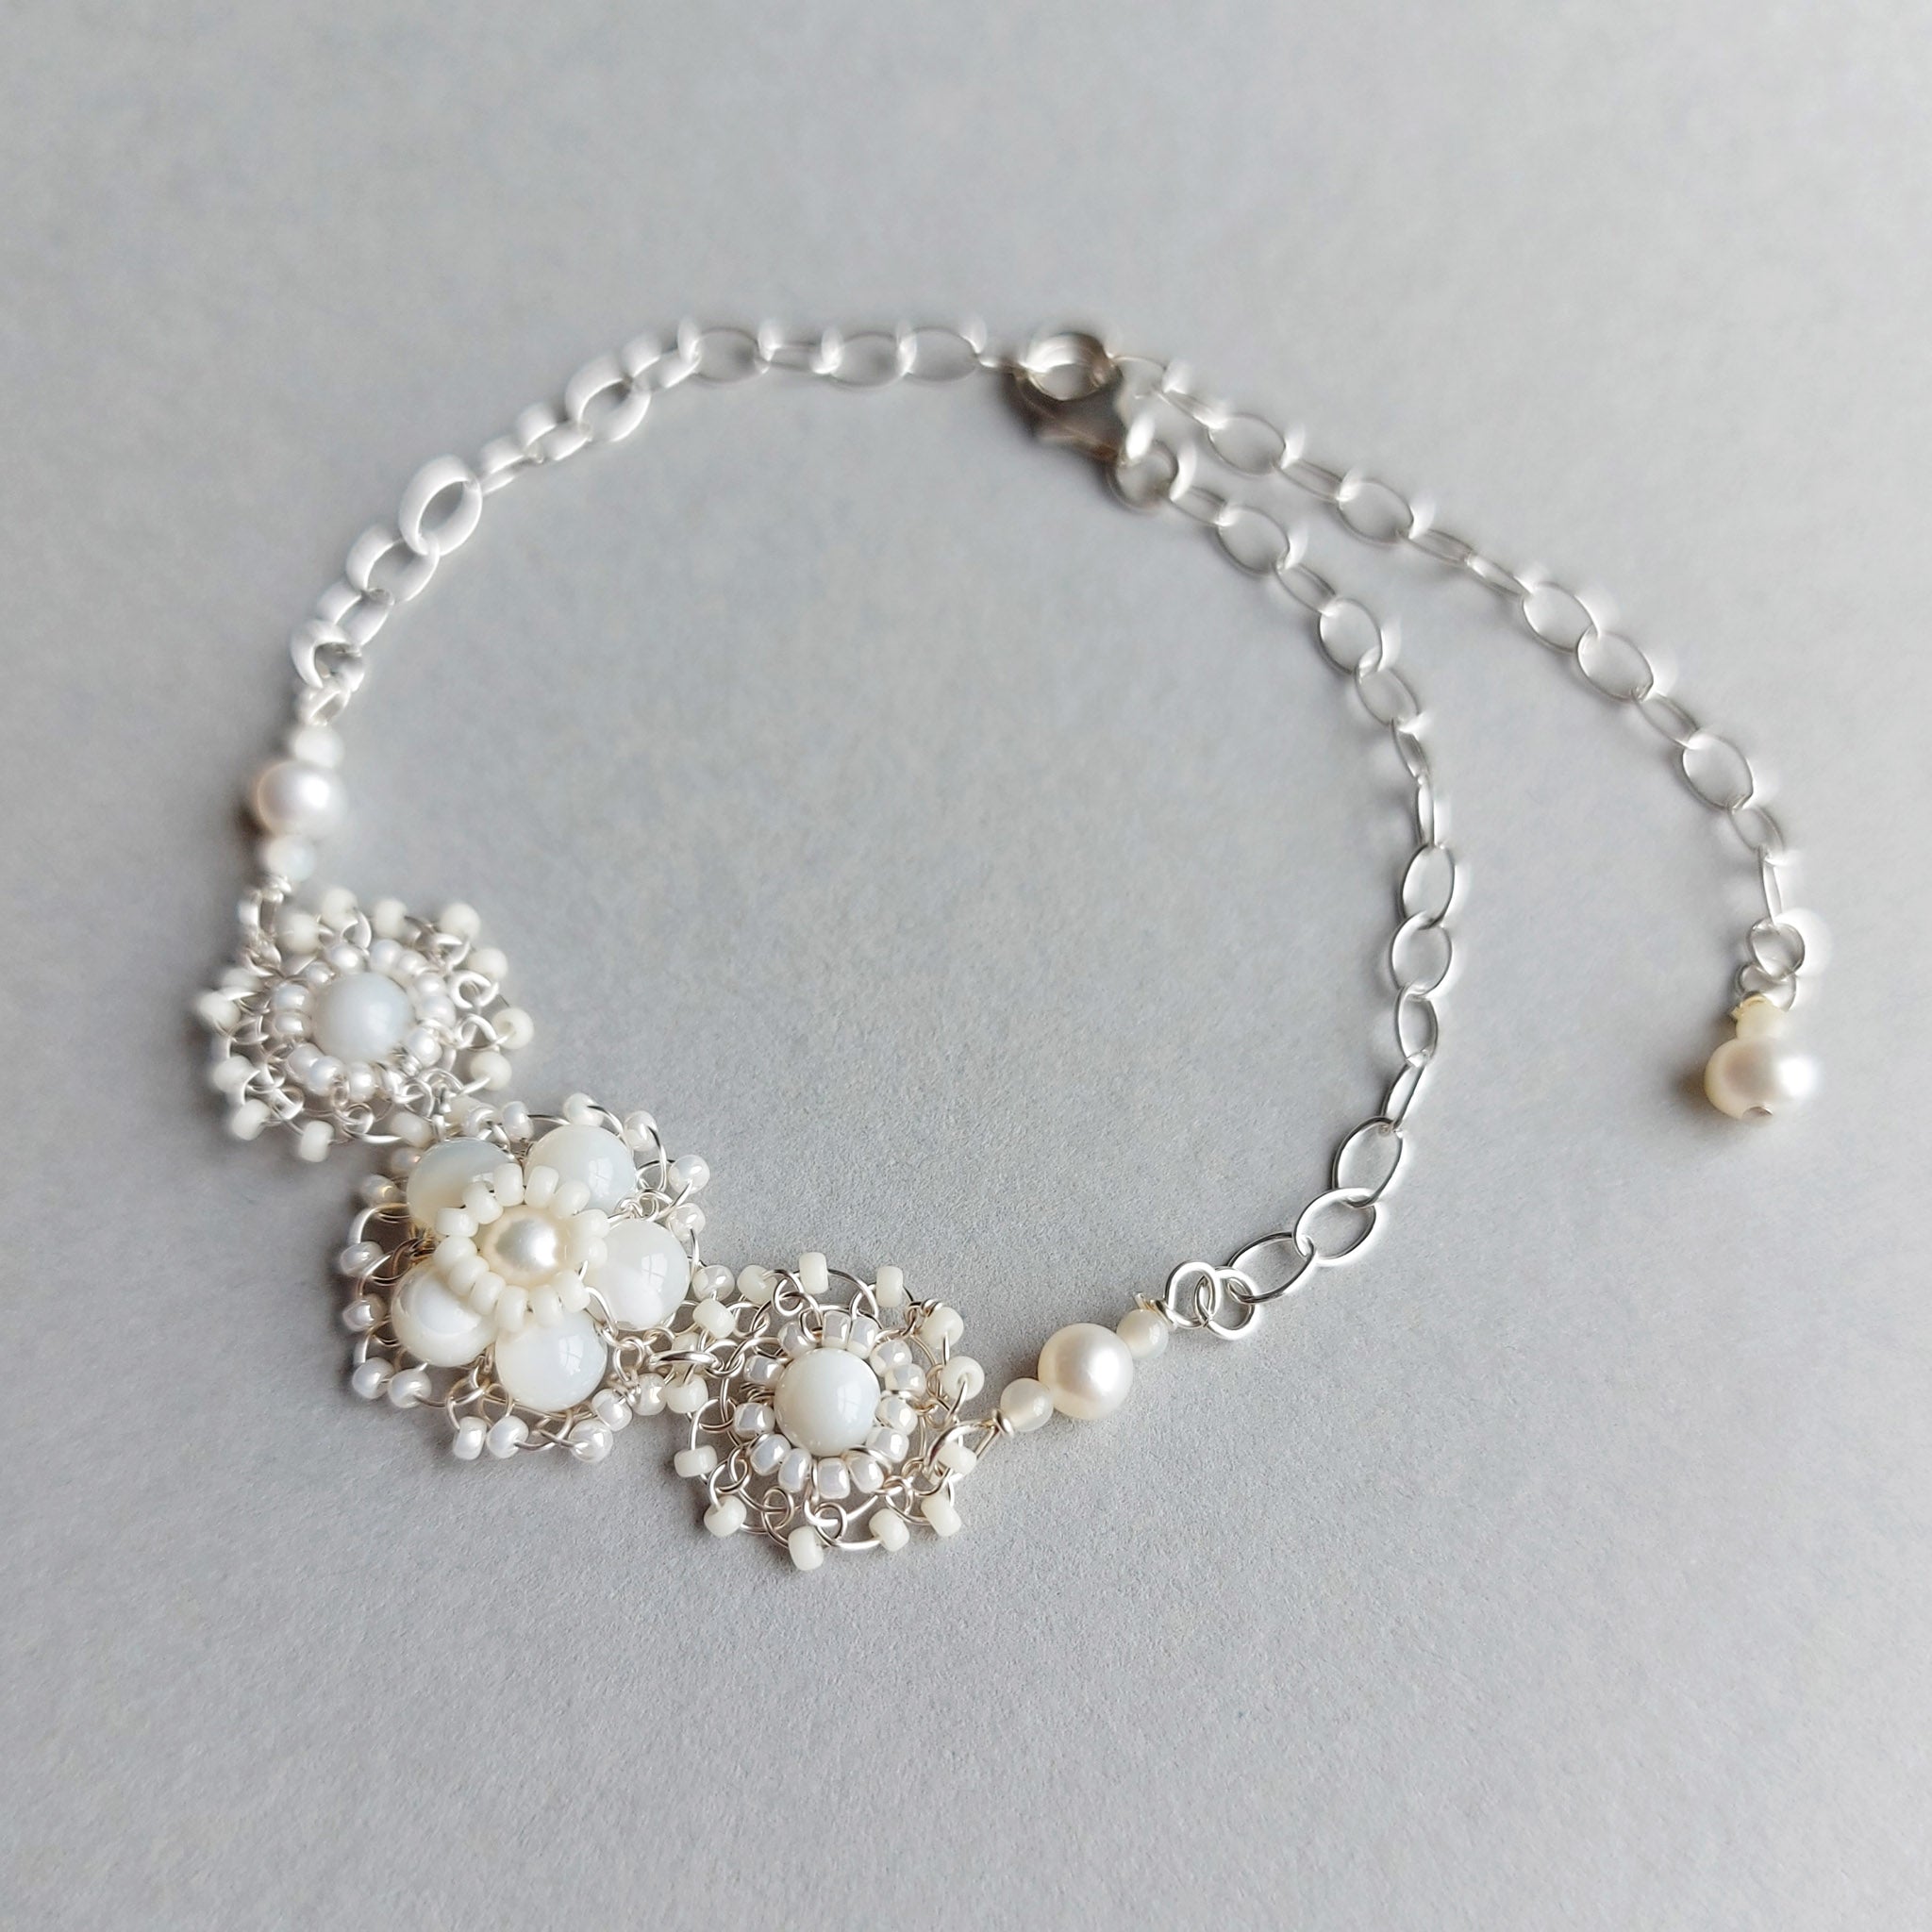 Silver wedding bracelet with pearls and mother of pearl, handmade by Judith Brown Bridal